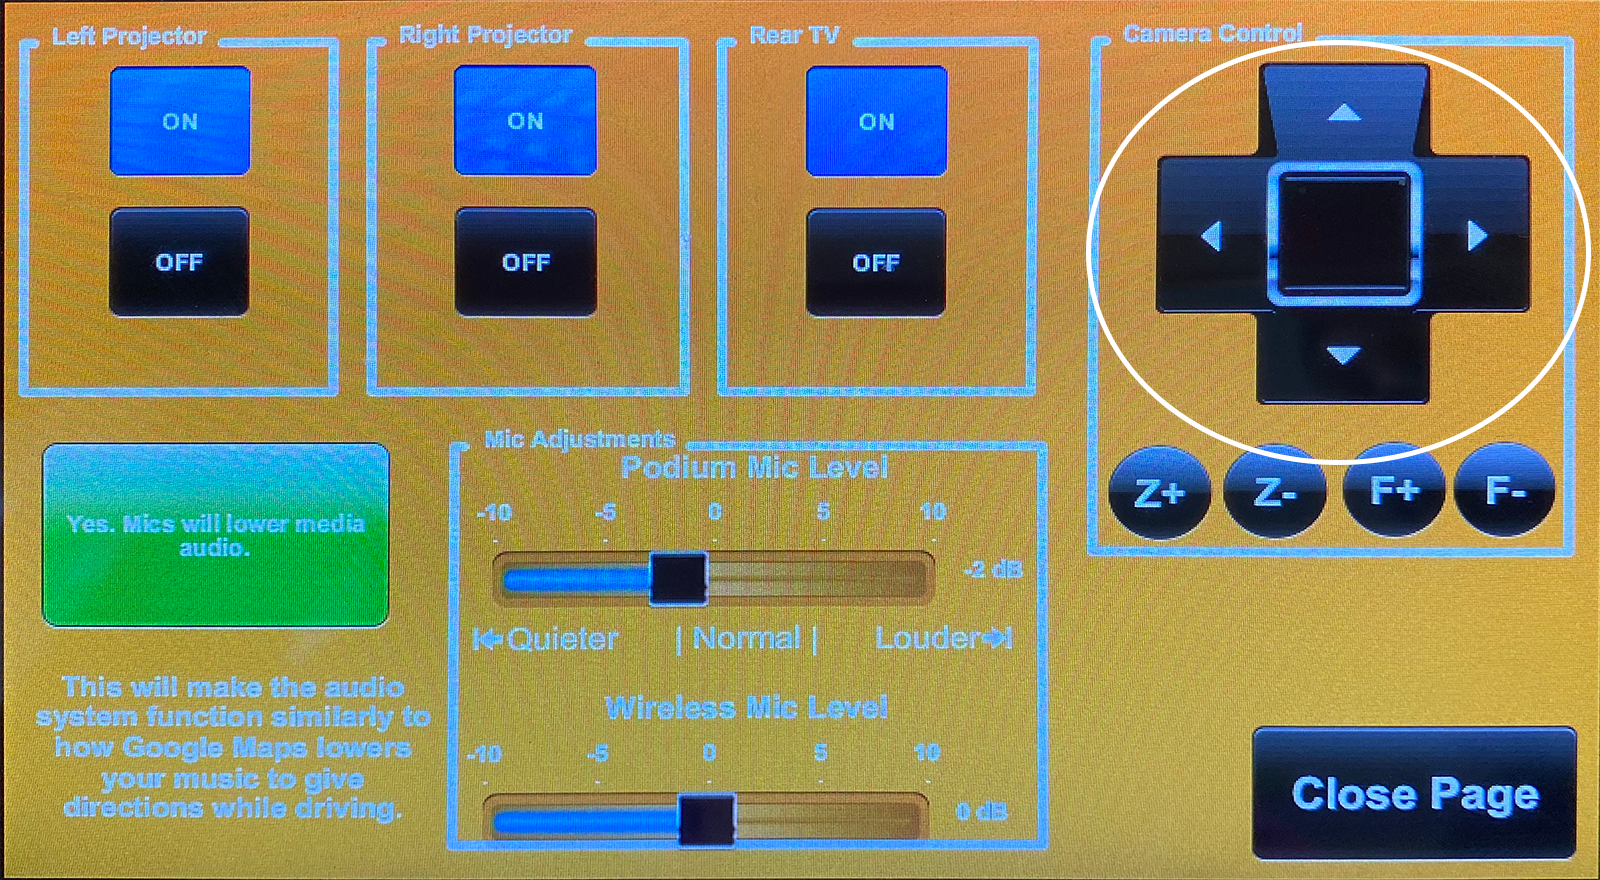 Touch Panel Camera Control